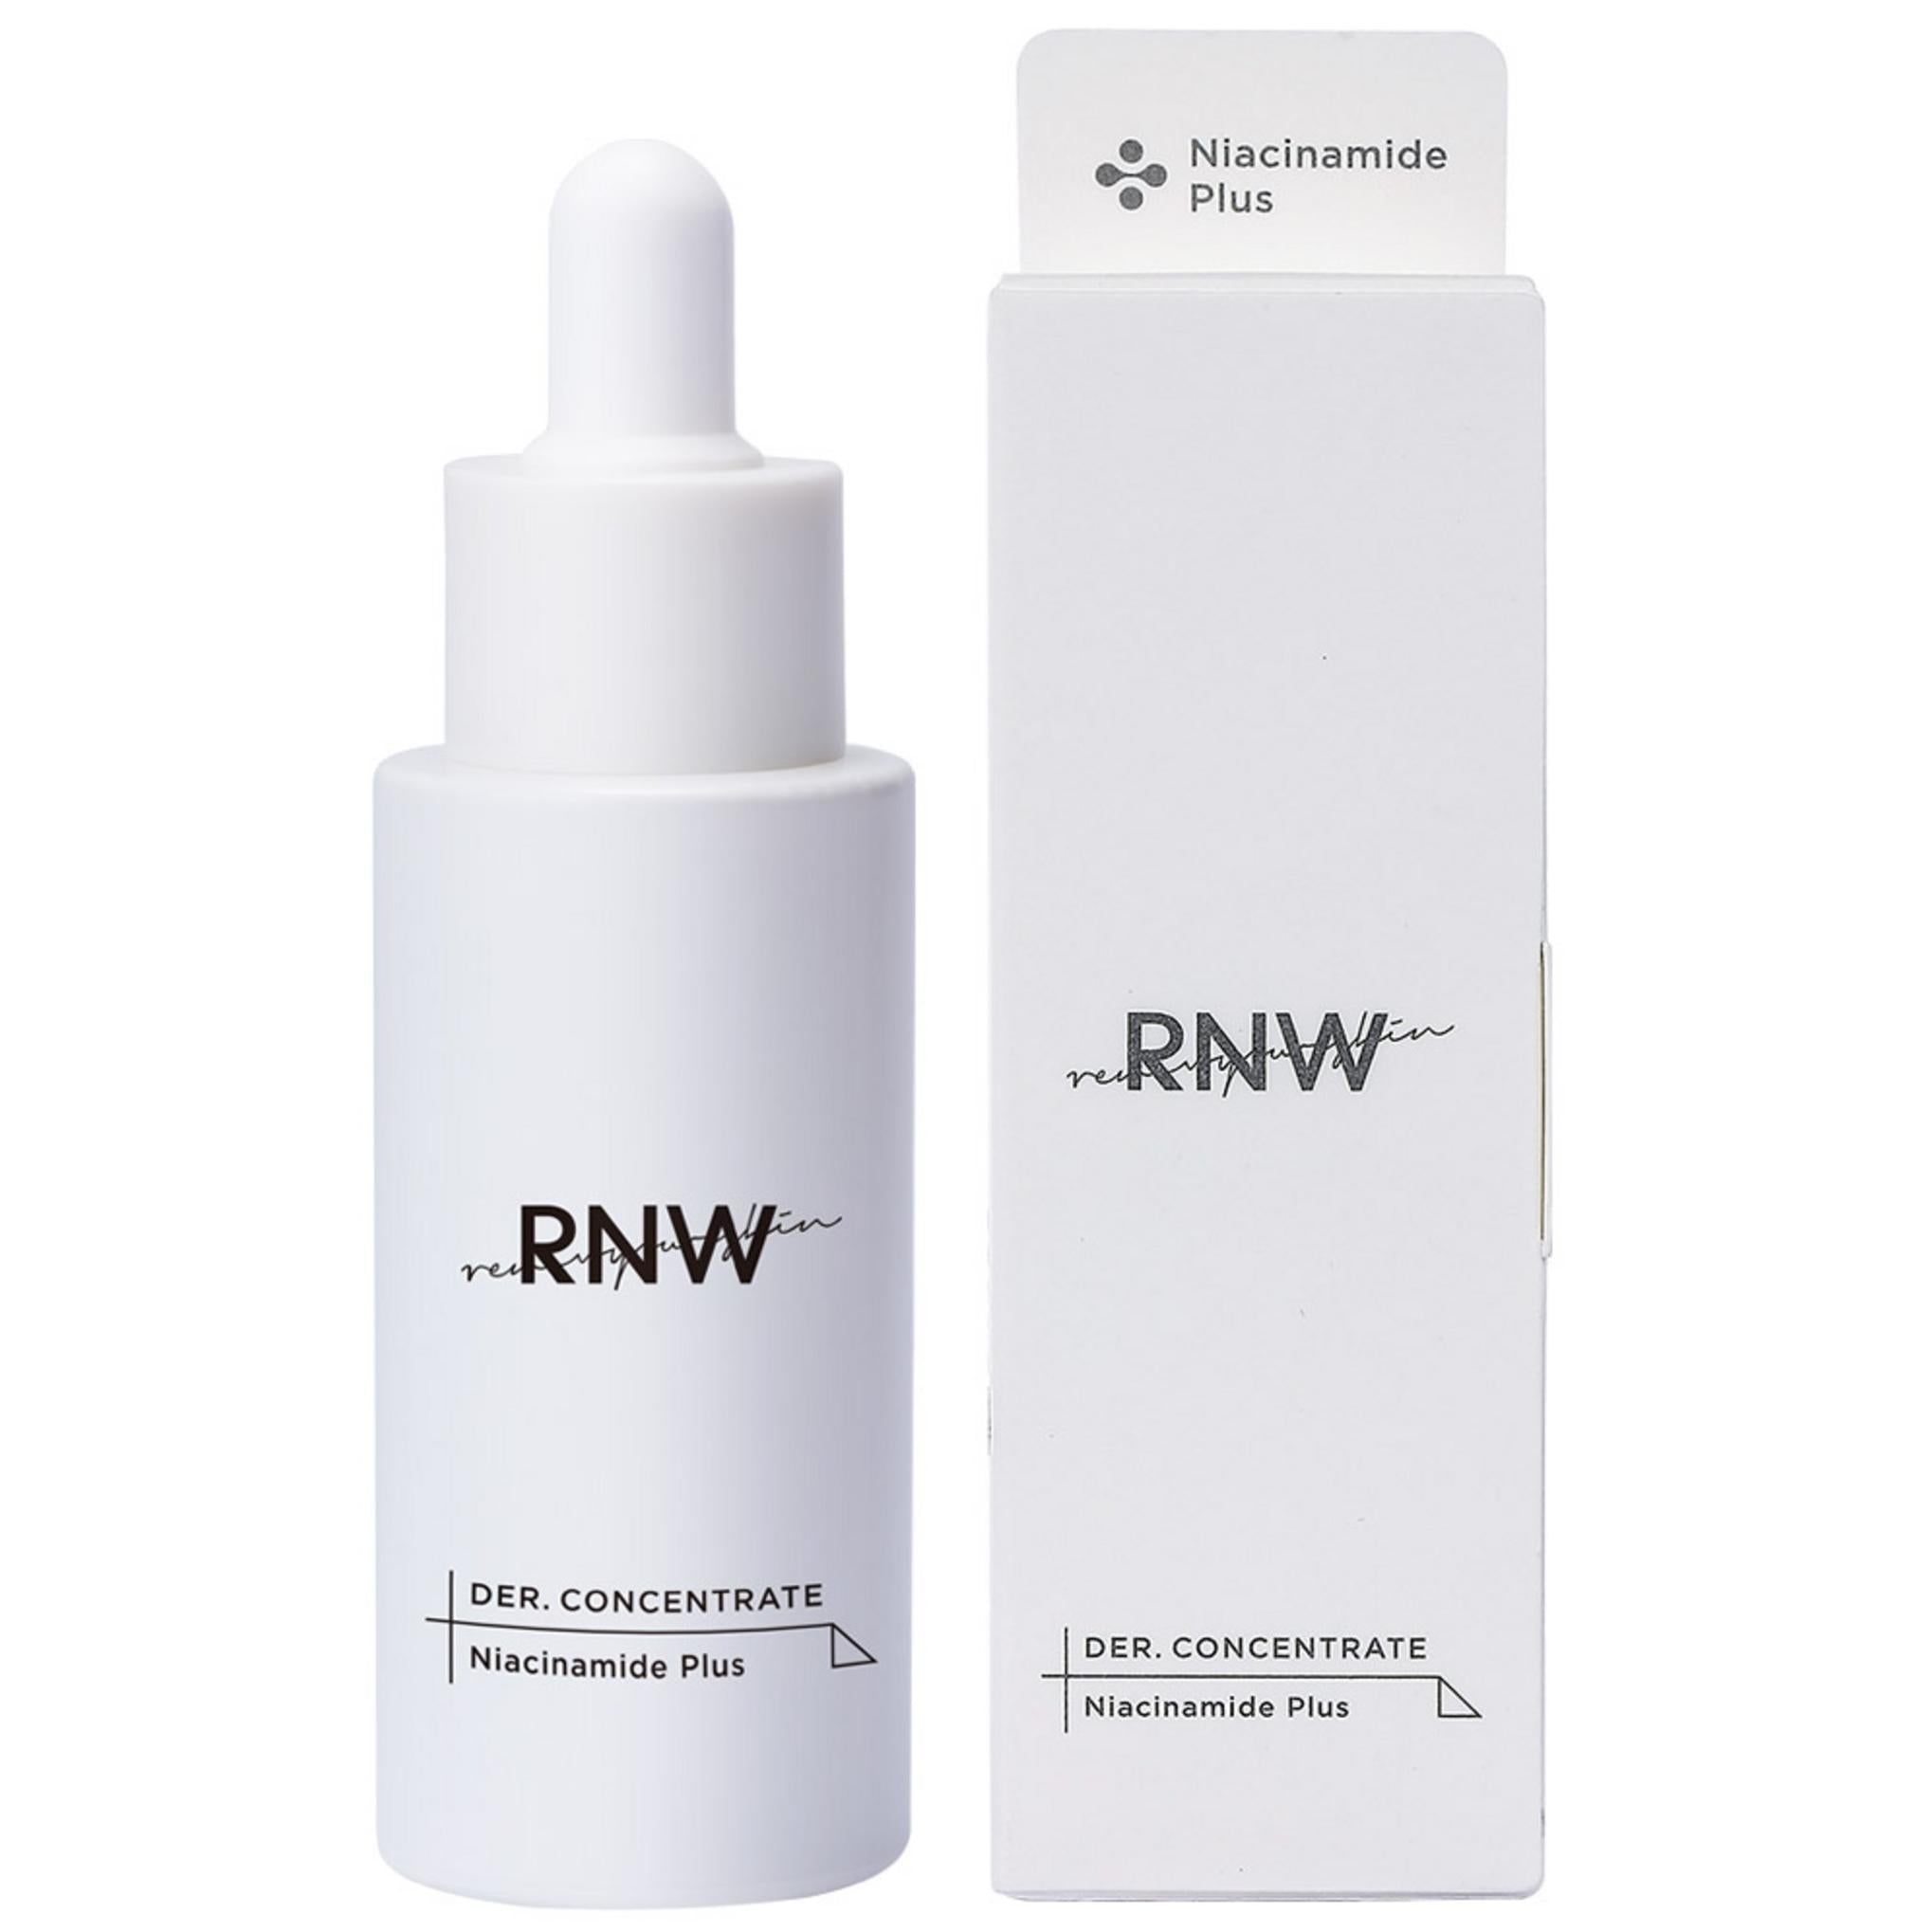 R&W Niacinamide Whitening Vitamin Blemish Trace Ampoule Serum